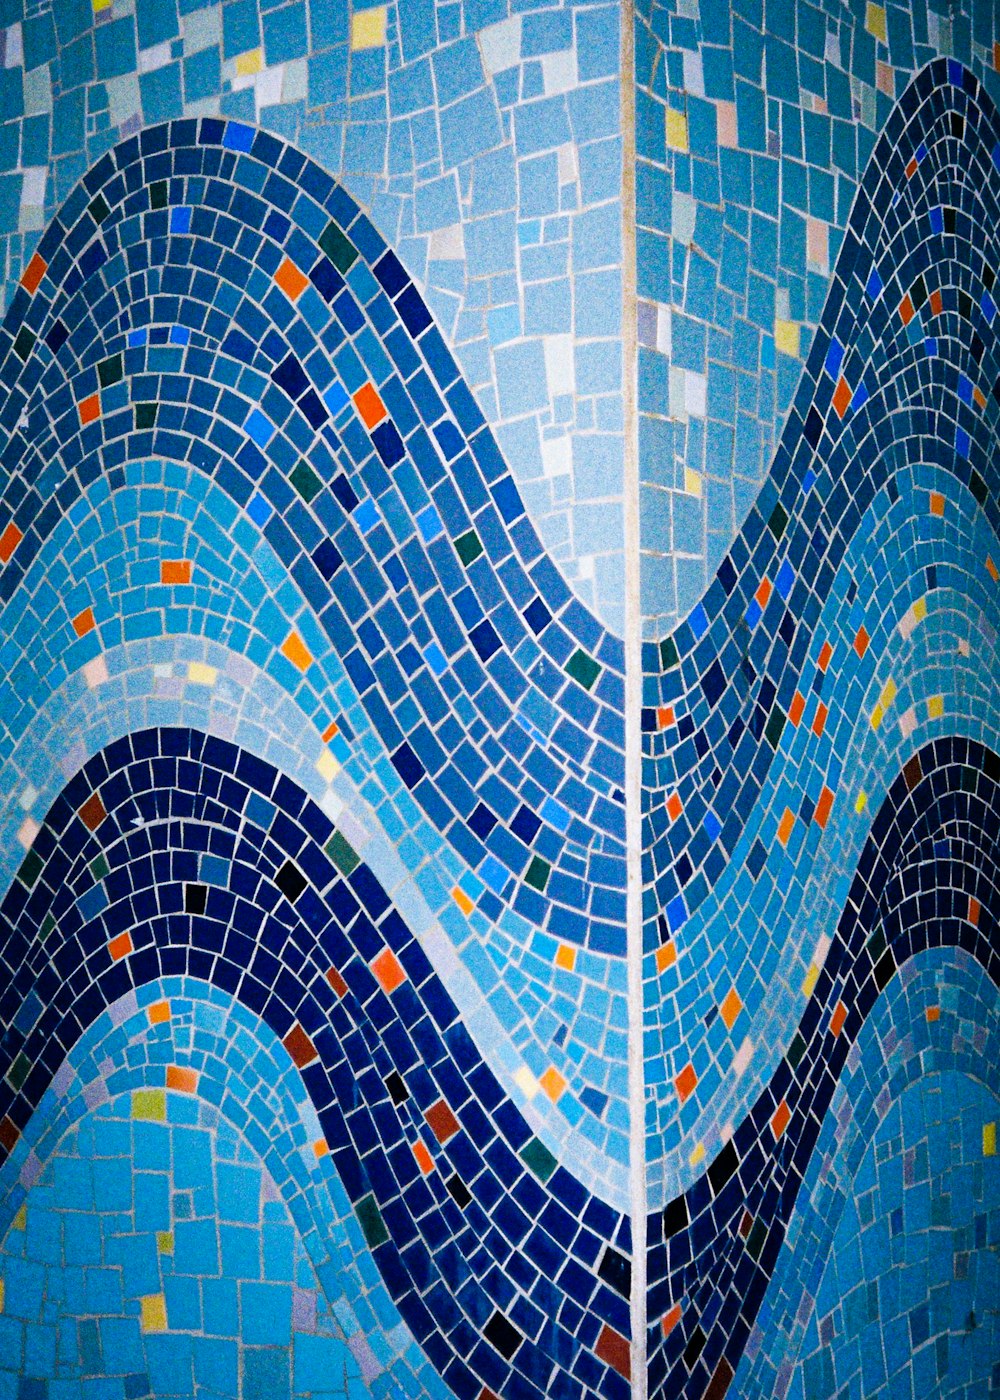 two images of a wall with blue and orange tiles